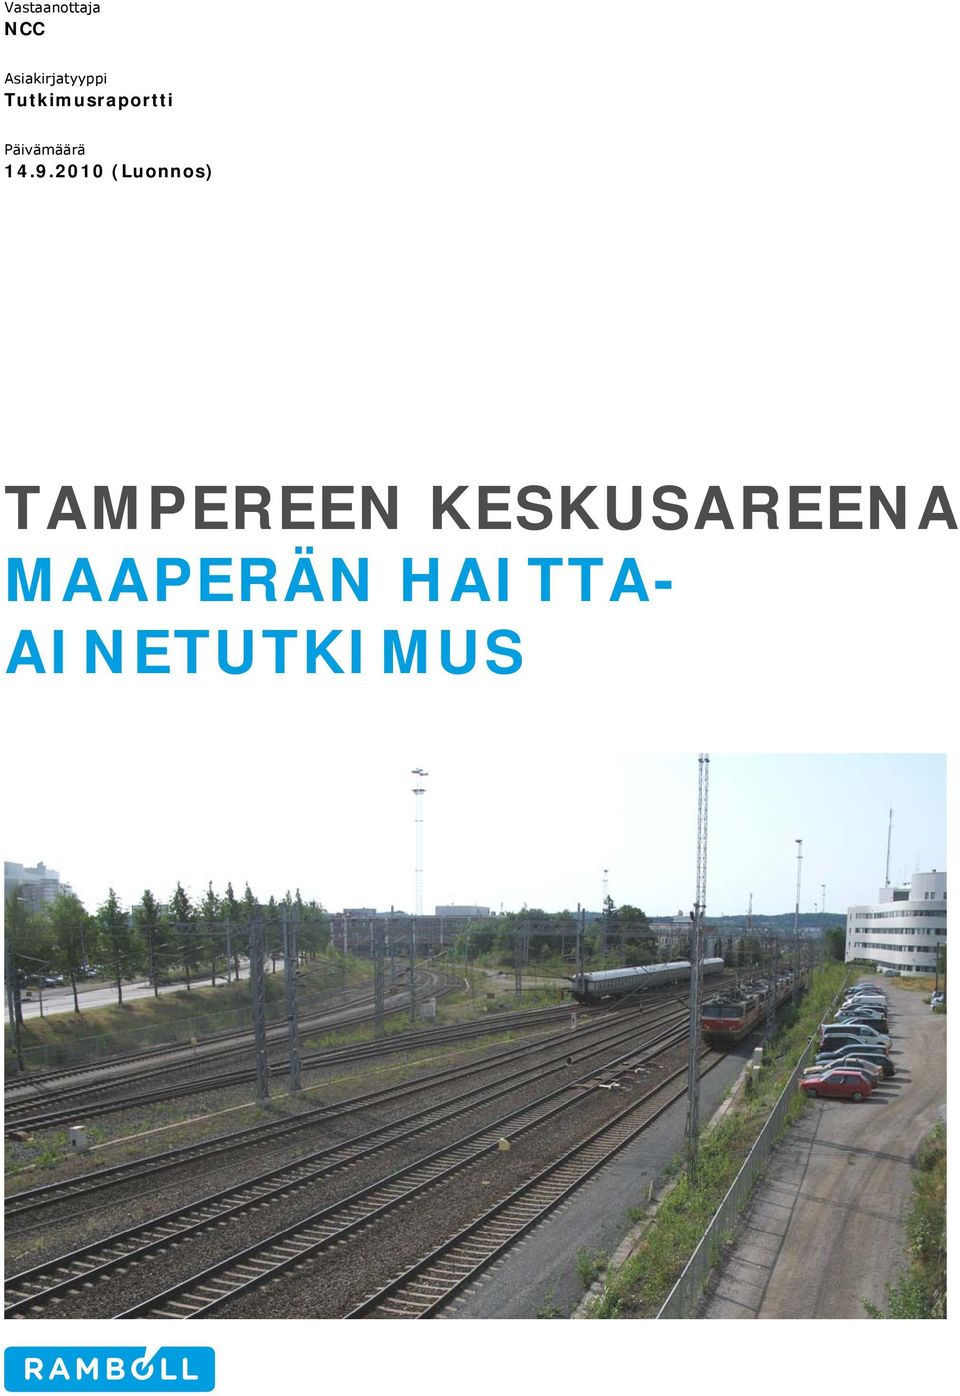 2010 (Luonnos) TAMPEREEN